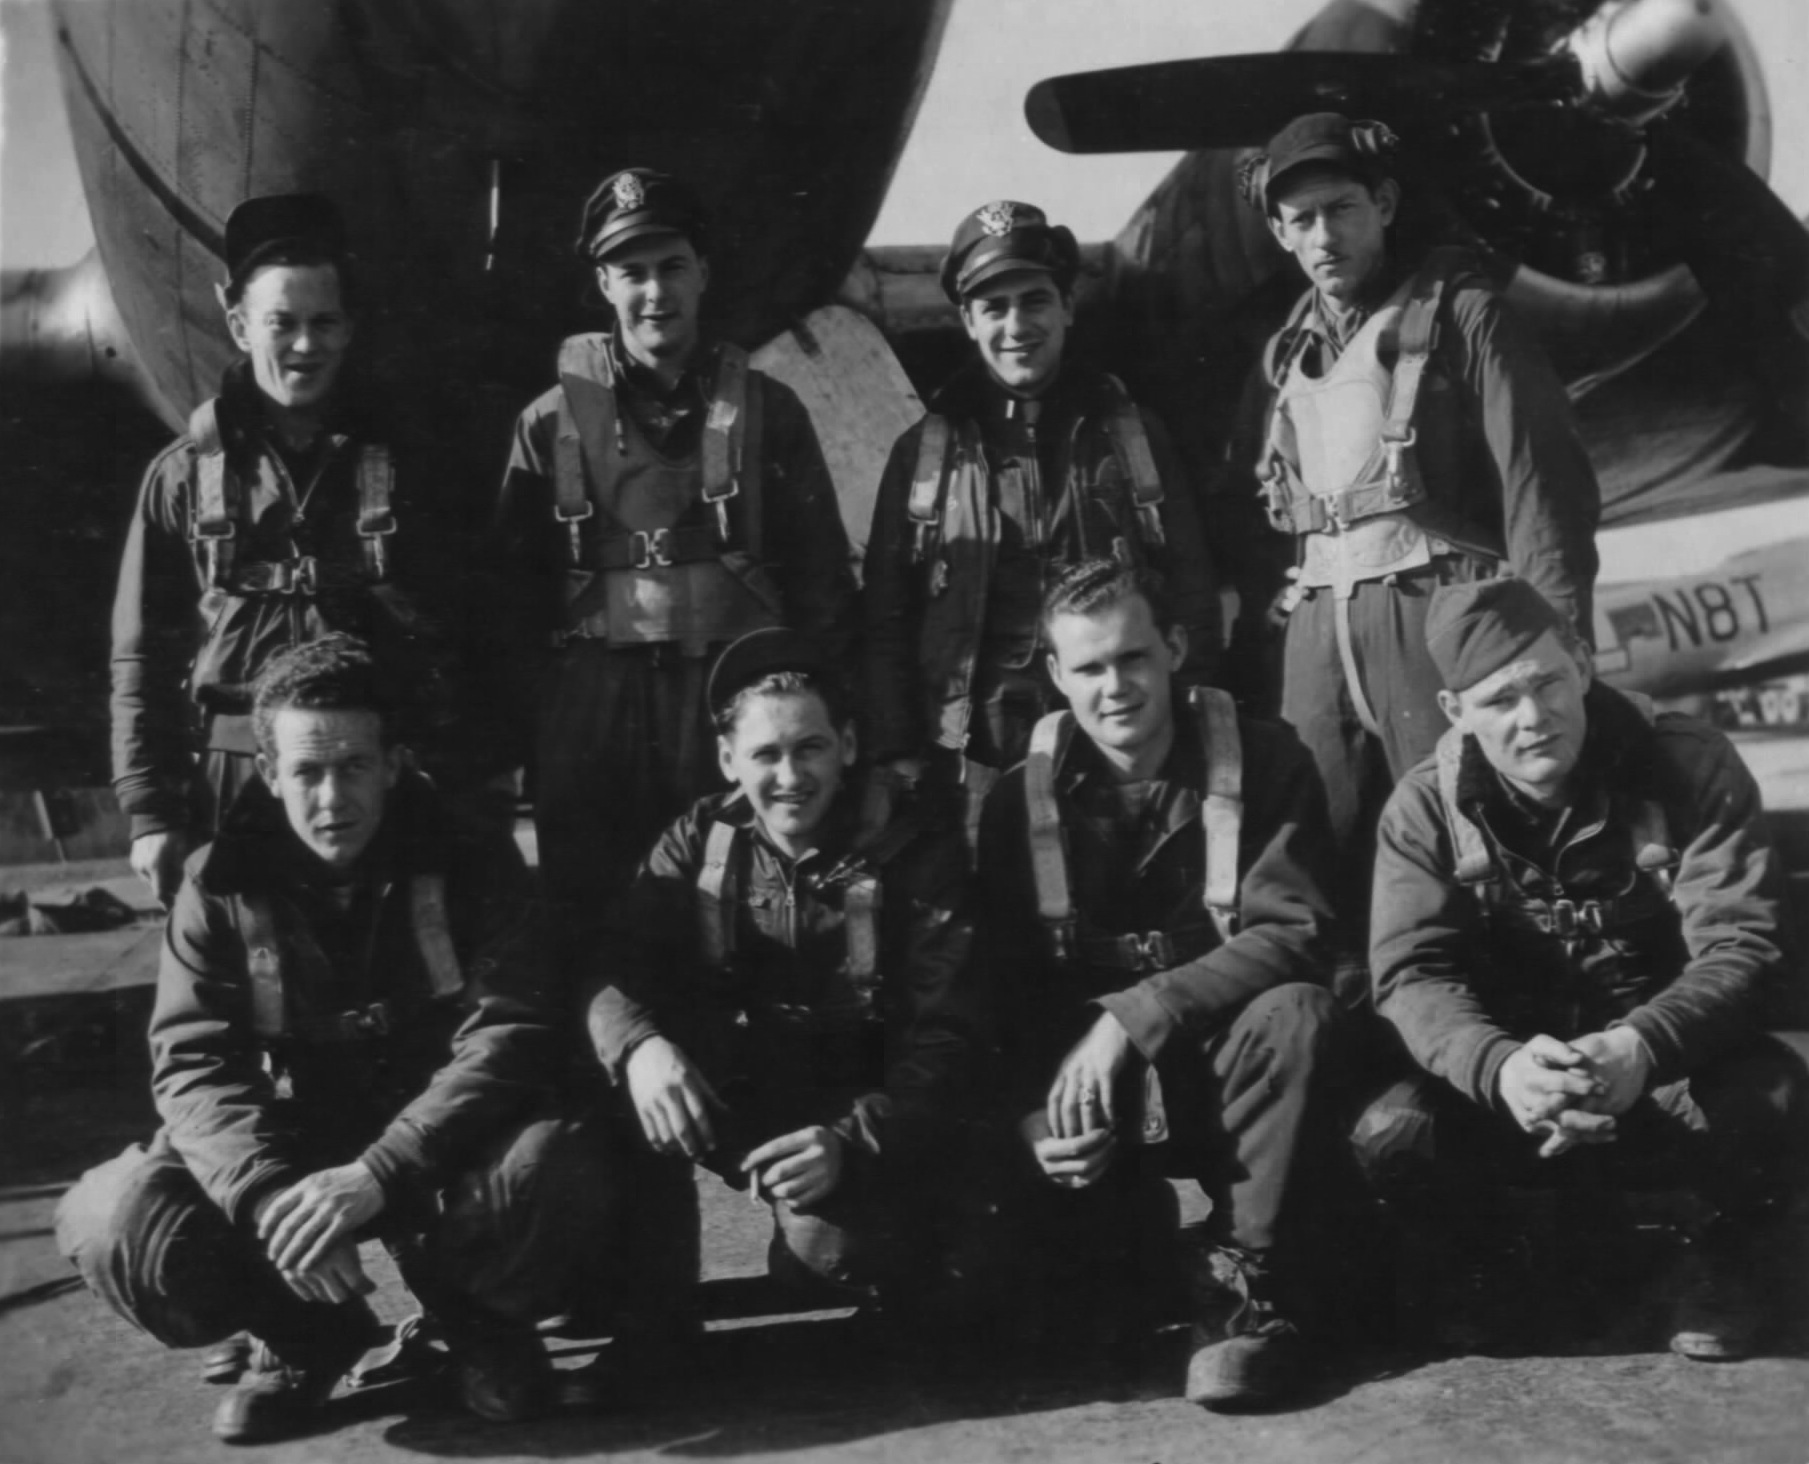 Woodmansee's Crew - 600th Squadron - 10 April 1945  